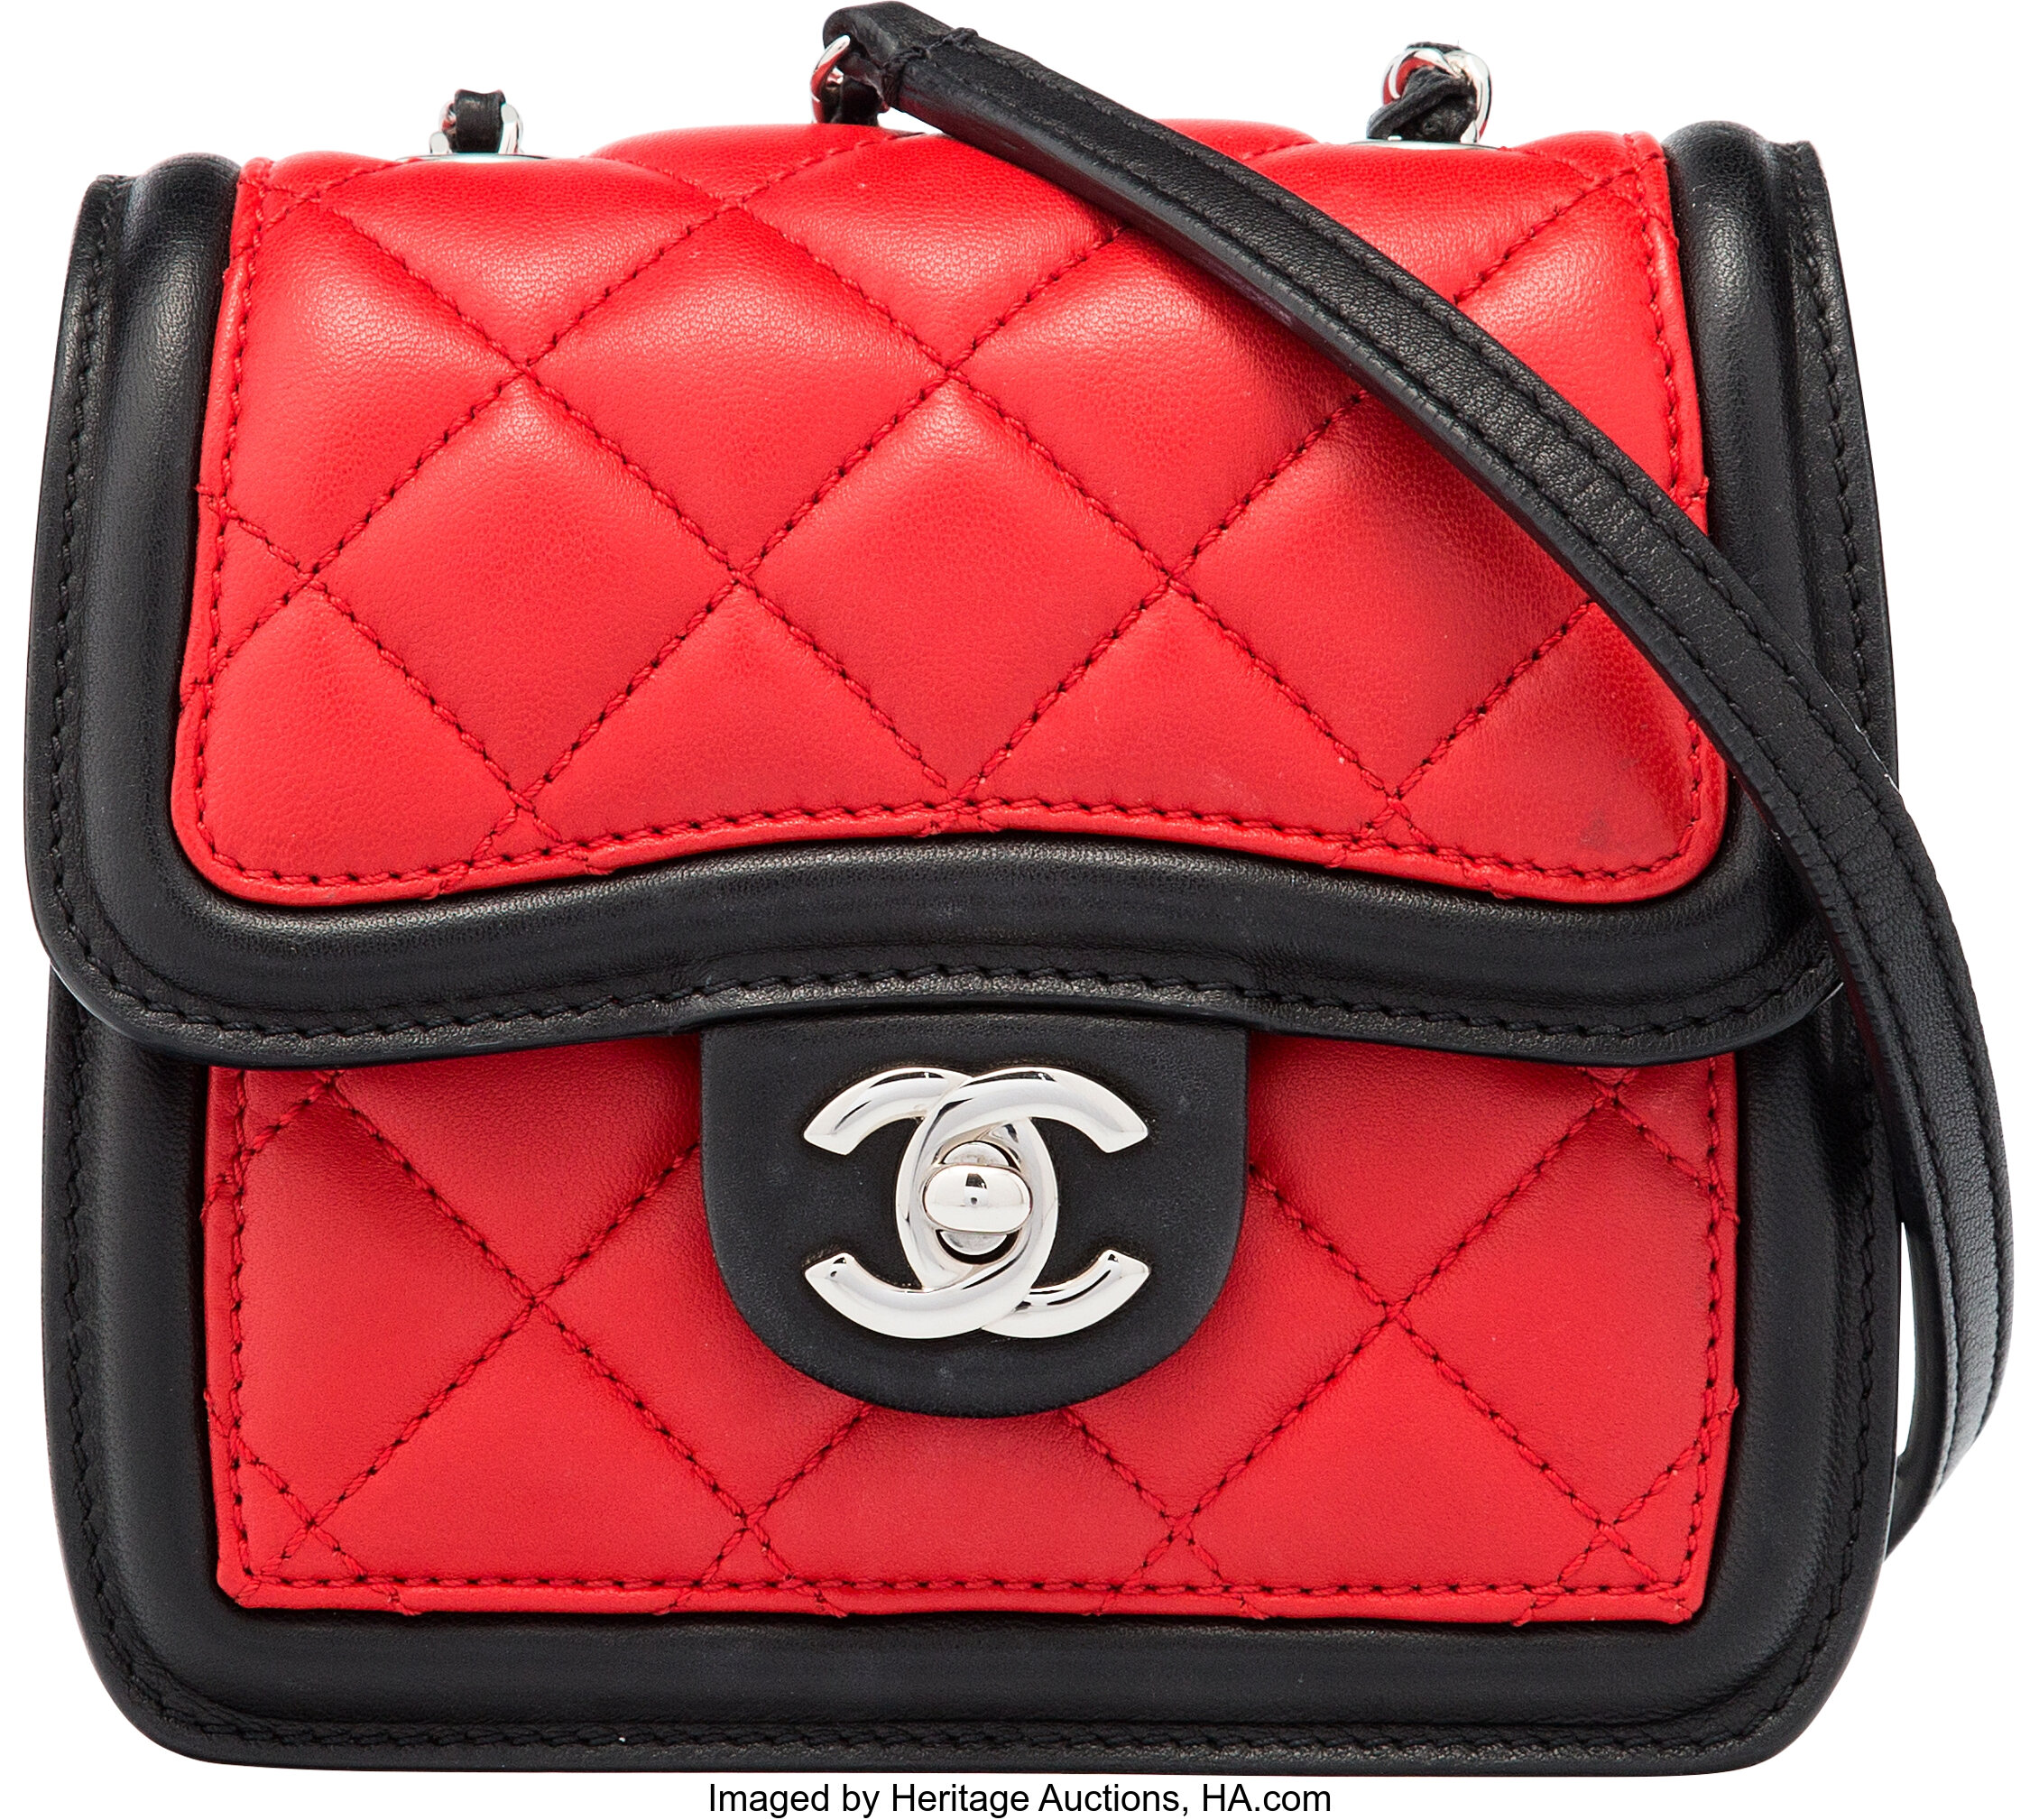 Chanel Red, Black & White Quilted Calfskin Leather Mini Flap Bag., Lot # 58230